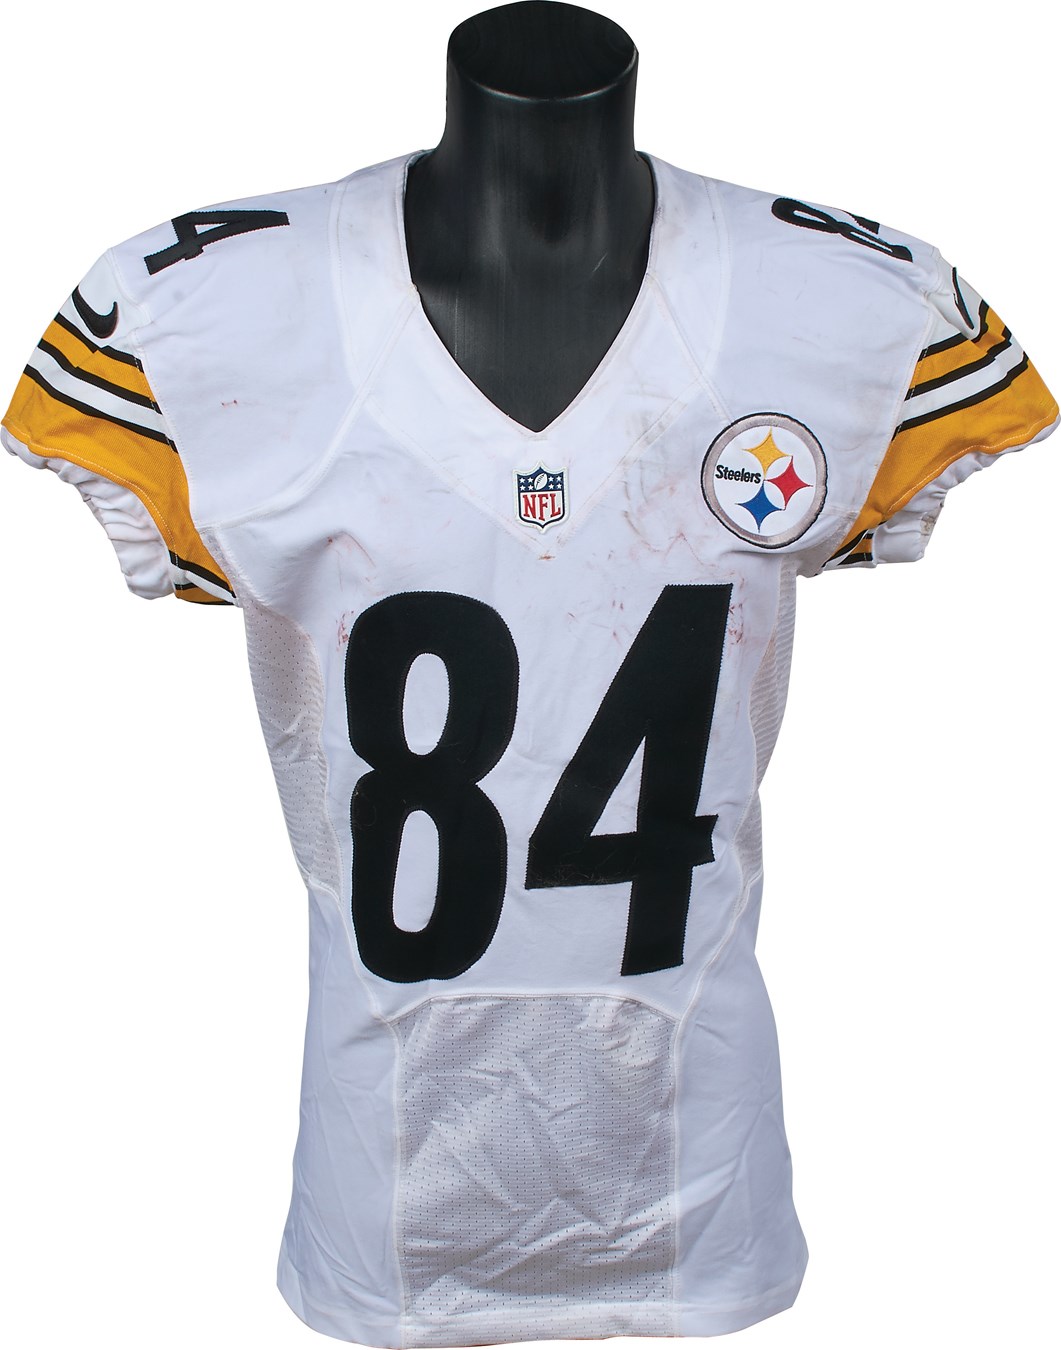 - September 11, 2014 Antonio Brown Pittsburgh Steelers Signed Game Worn Jersey (Photo-Match)